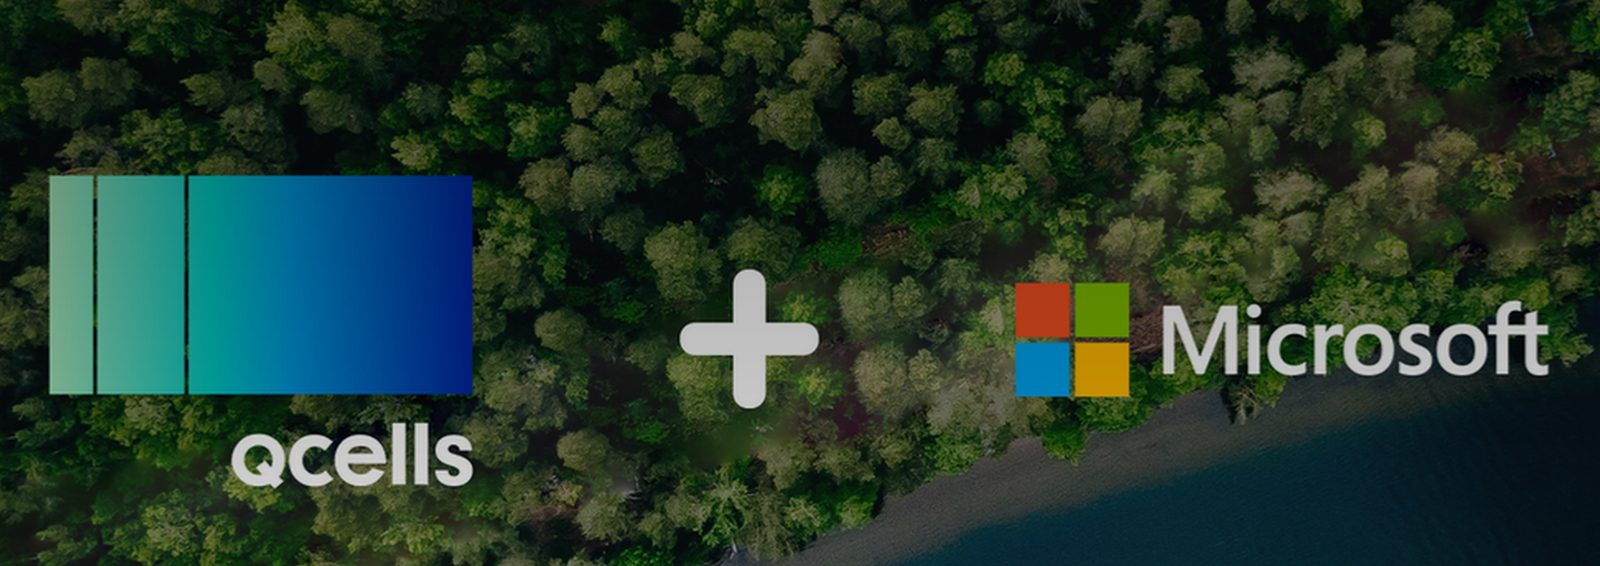 Microsoft and Qcells Form Strategic Partnership for Clean Energy Economy